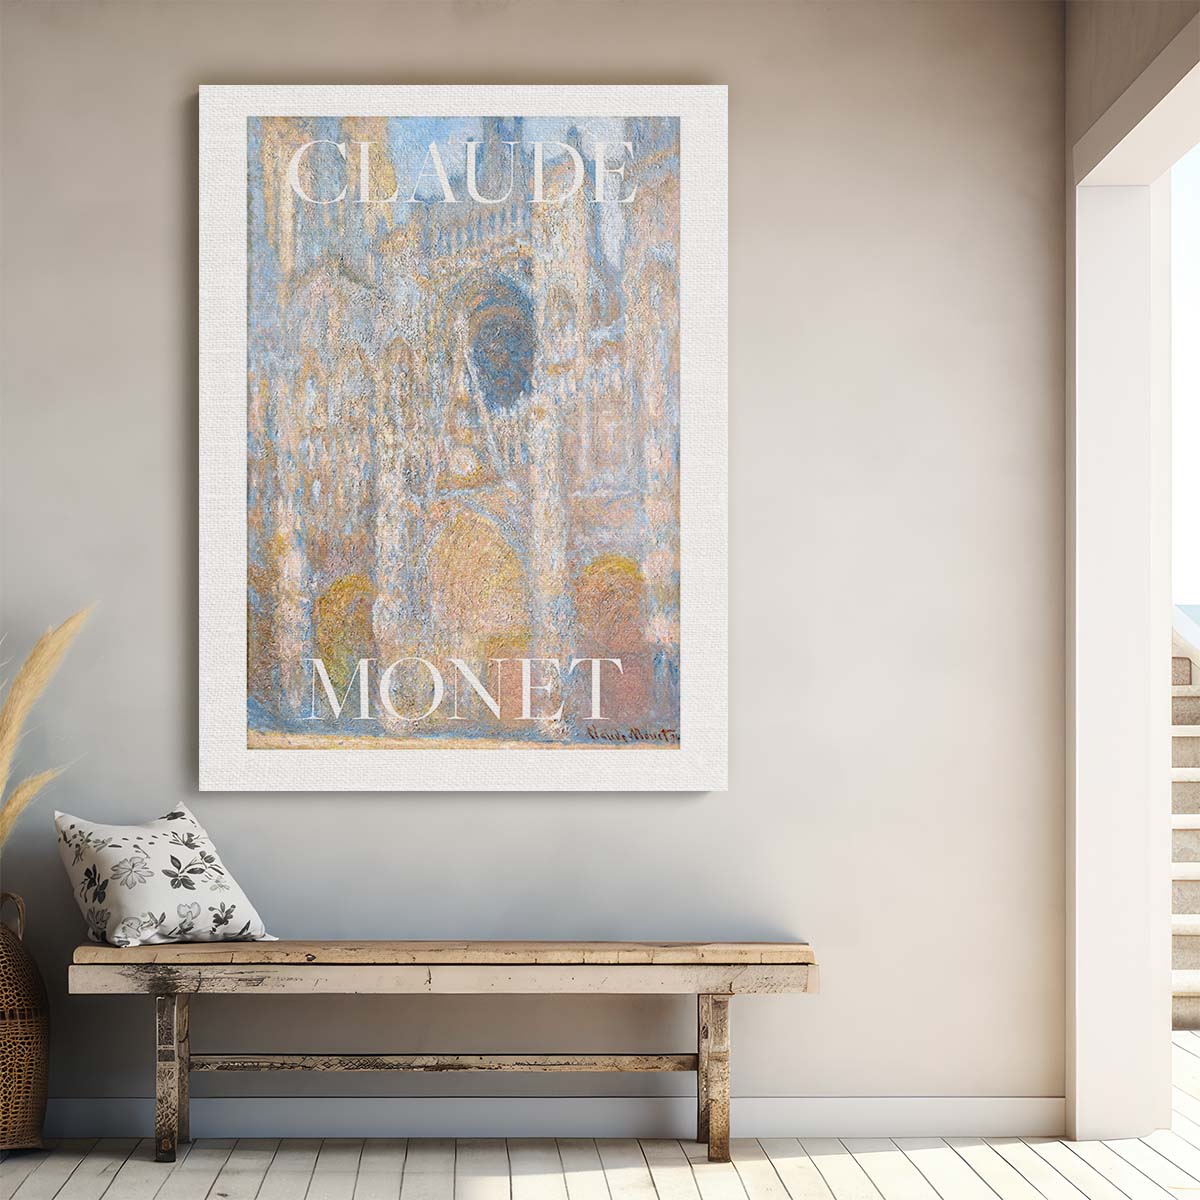 Claude Monet's Cour d'Albane Oil Painting Illustration Poster by Luxuriance Designs, made in USA